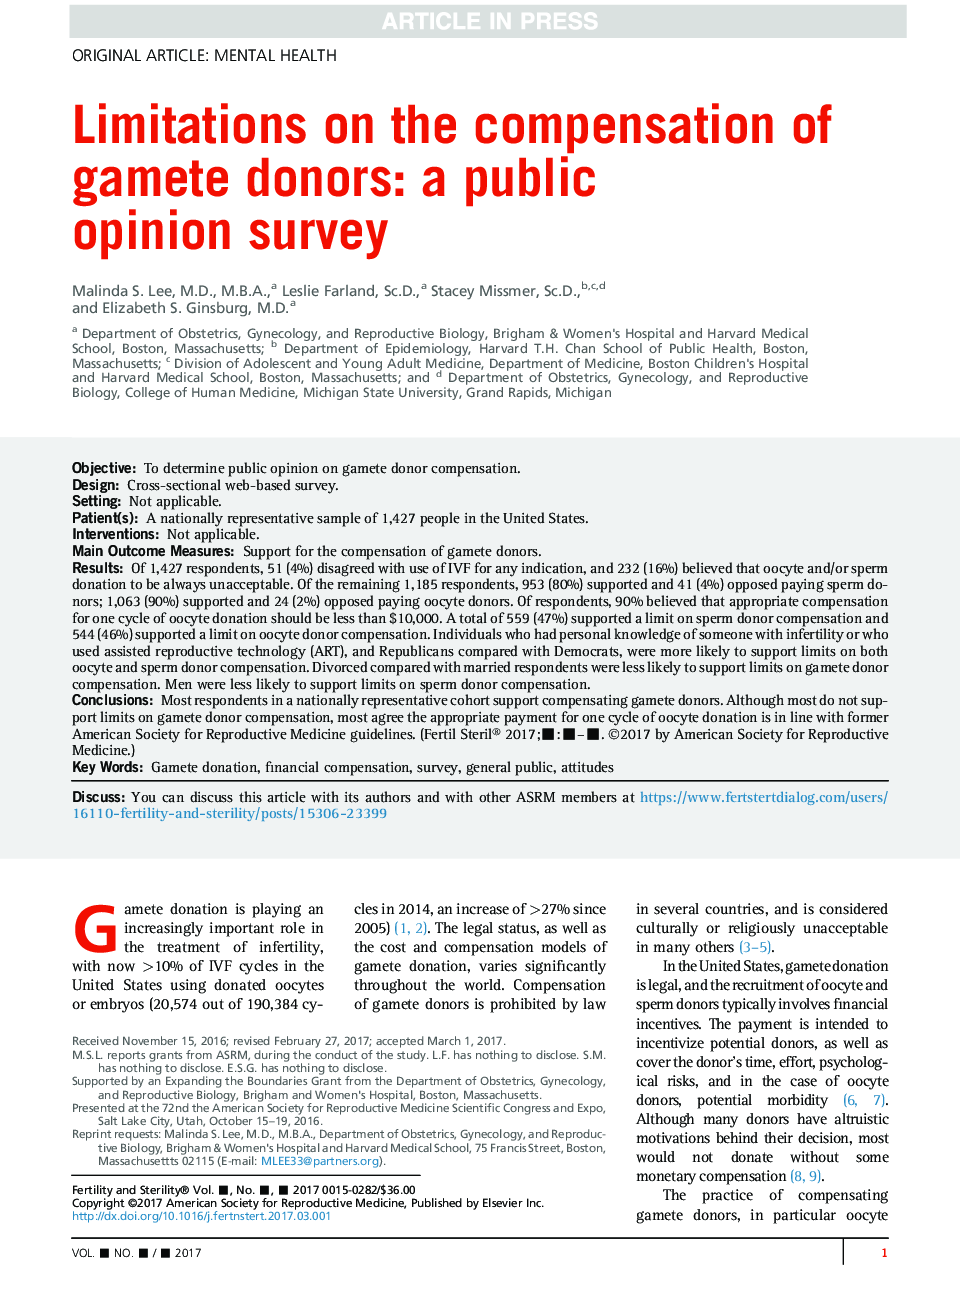 Limitations on the compensation of gamete donors: a public opinion survey